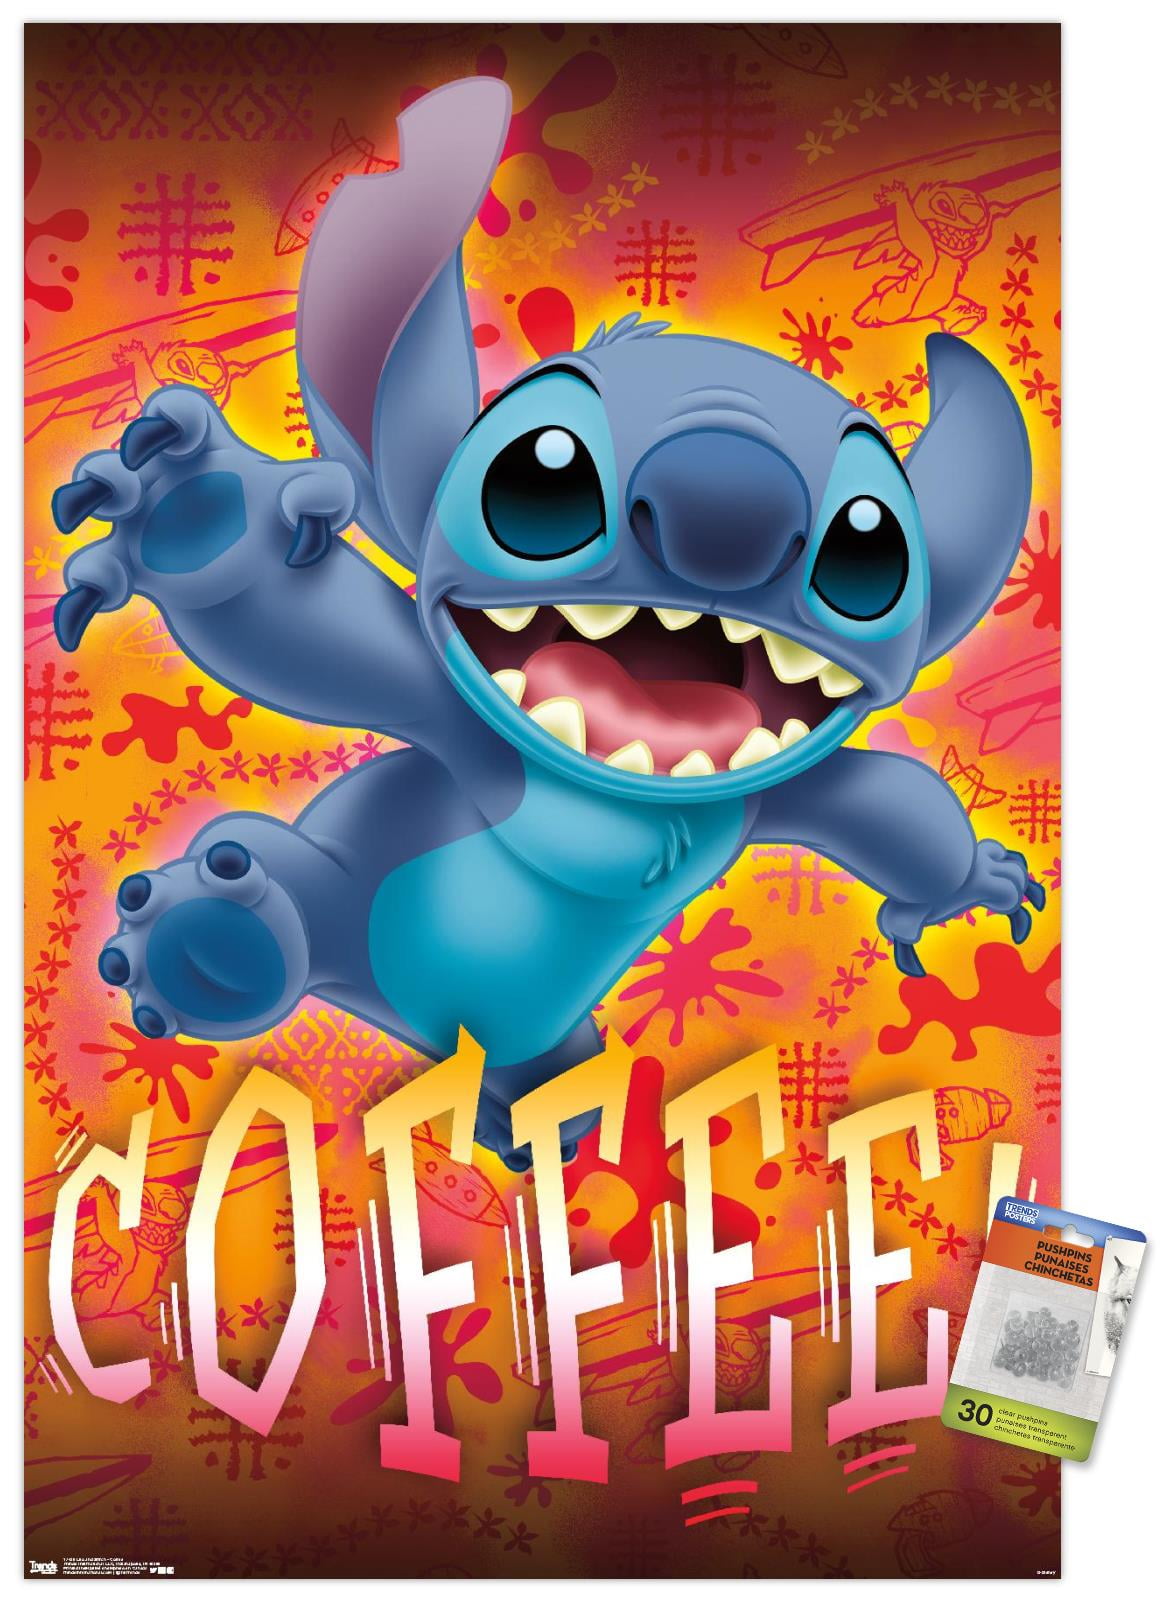 Disney Lilo and Stitch - Coffee Wall Poster with Push Pins, 22.375 x 34 